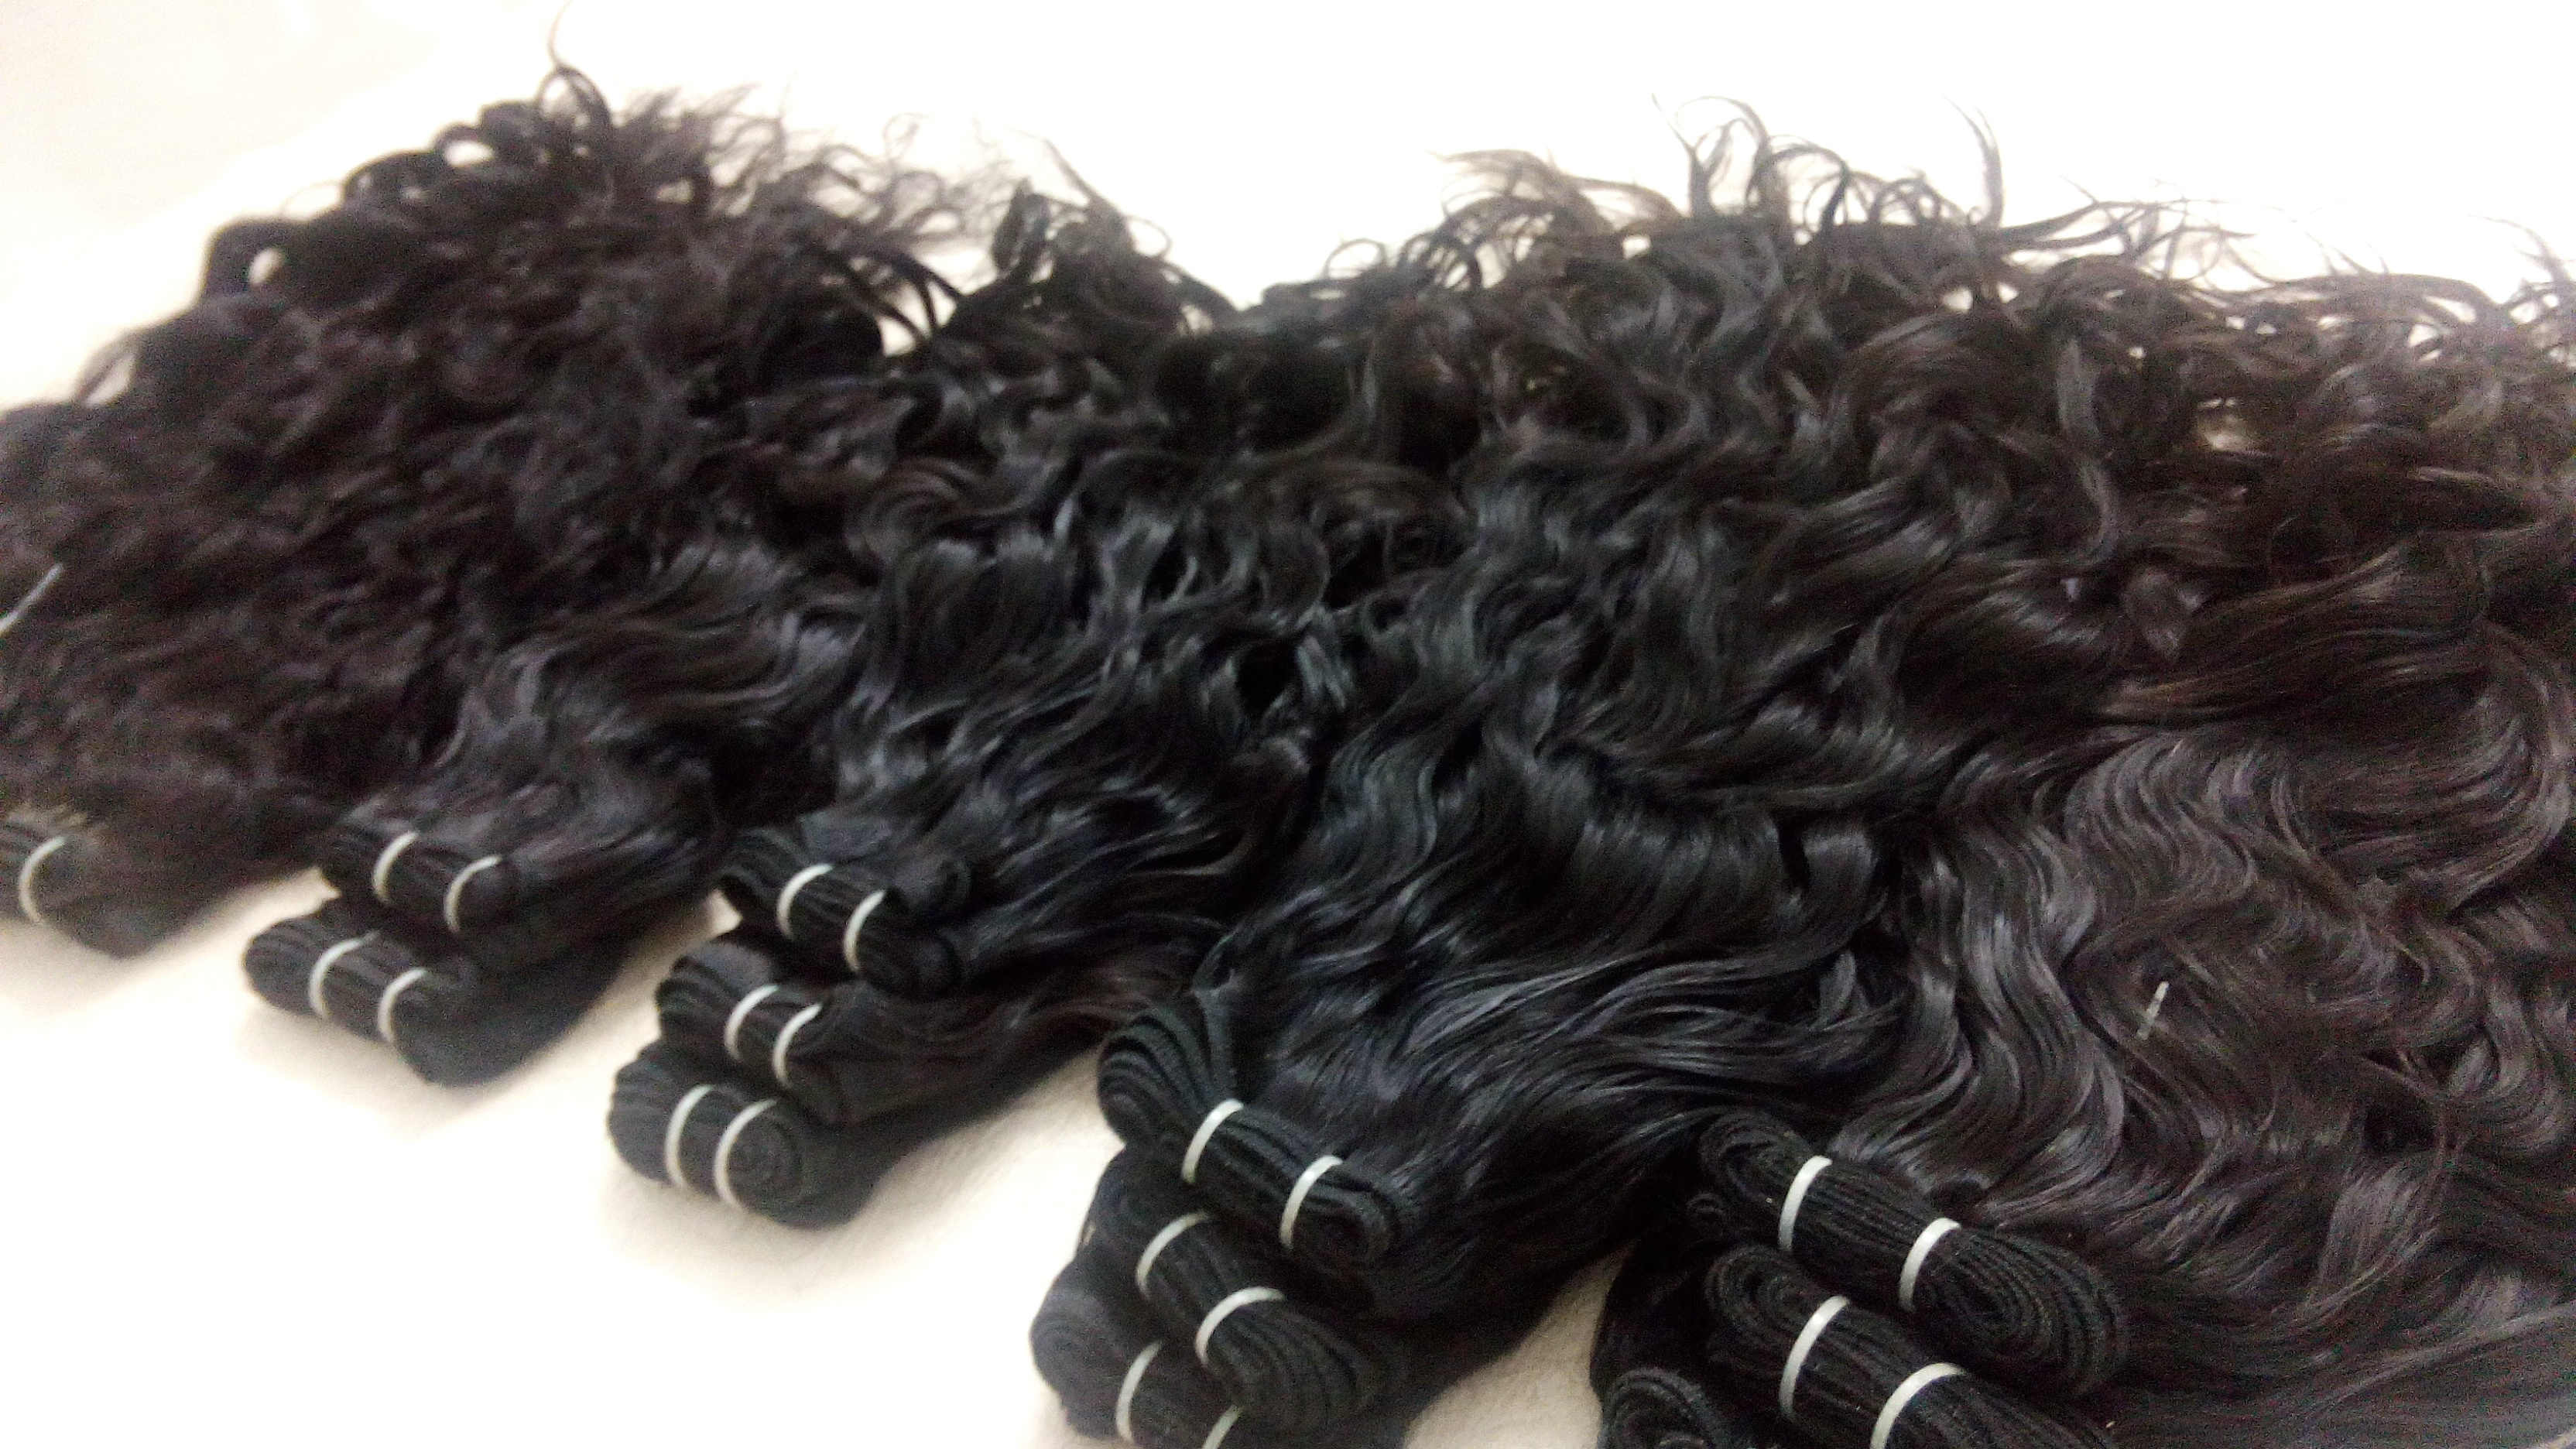 Wholesale Iindian Human Hair Extension Products Video